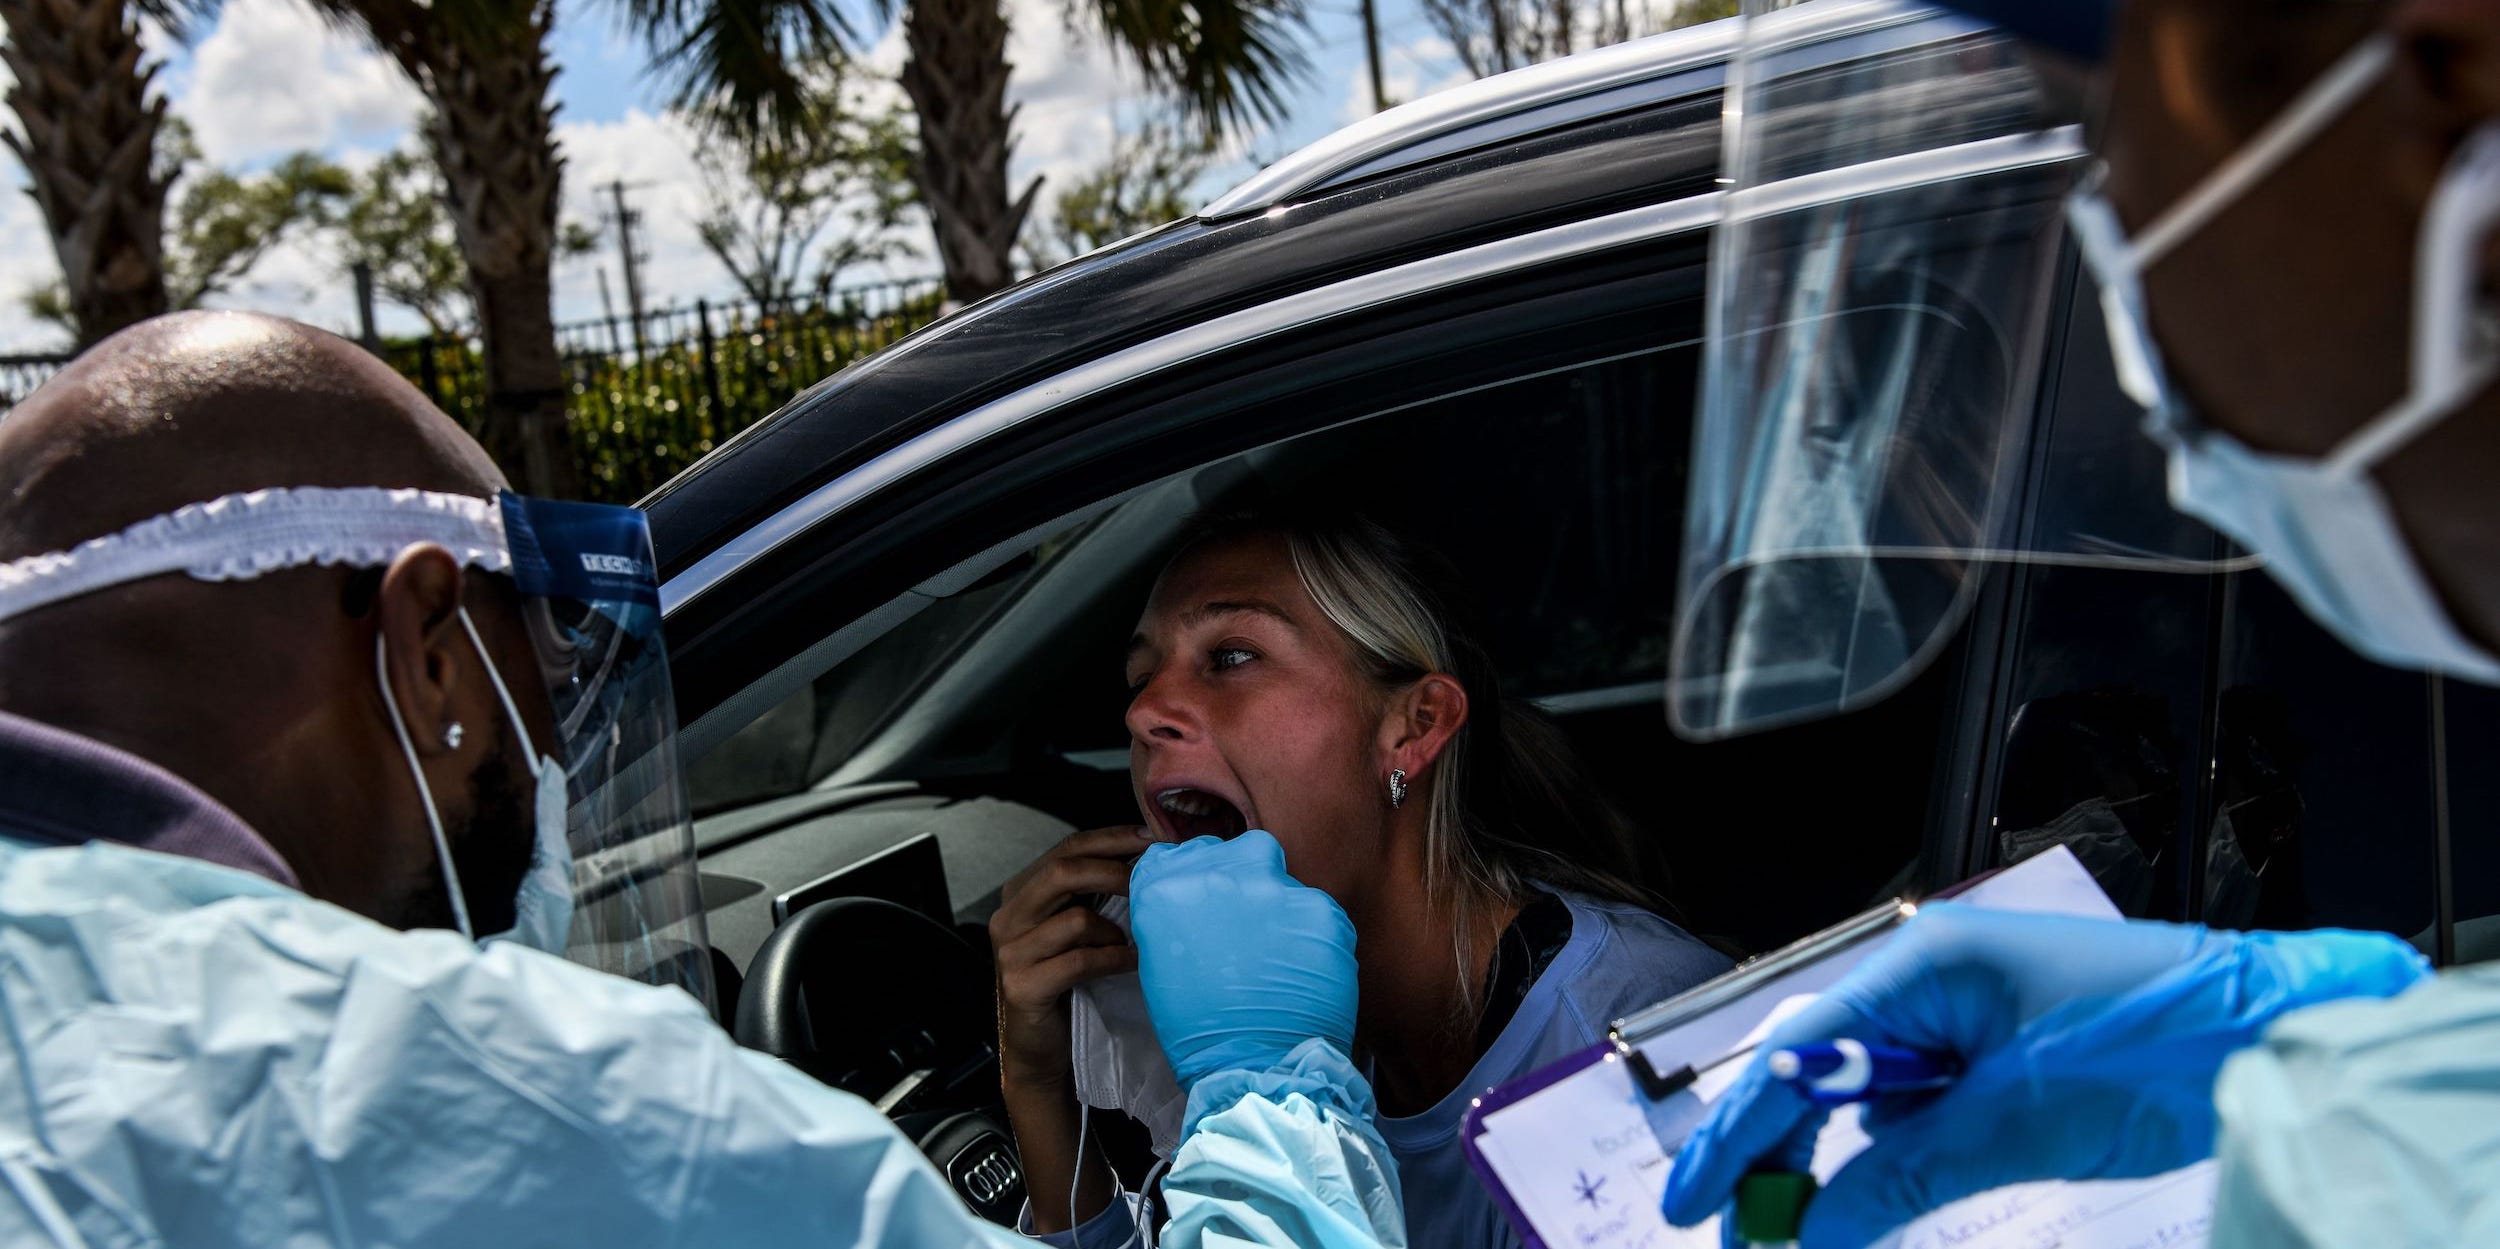 A Florida woman ireceives a coronavirus test in her car.